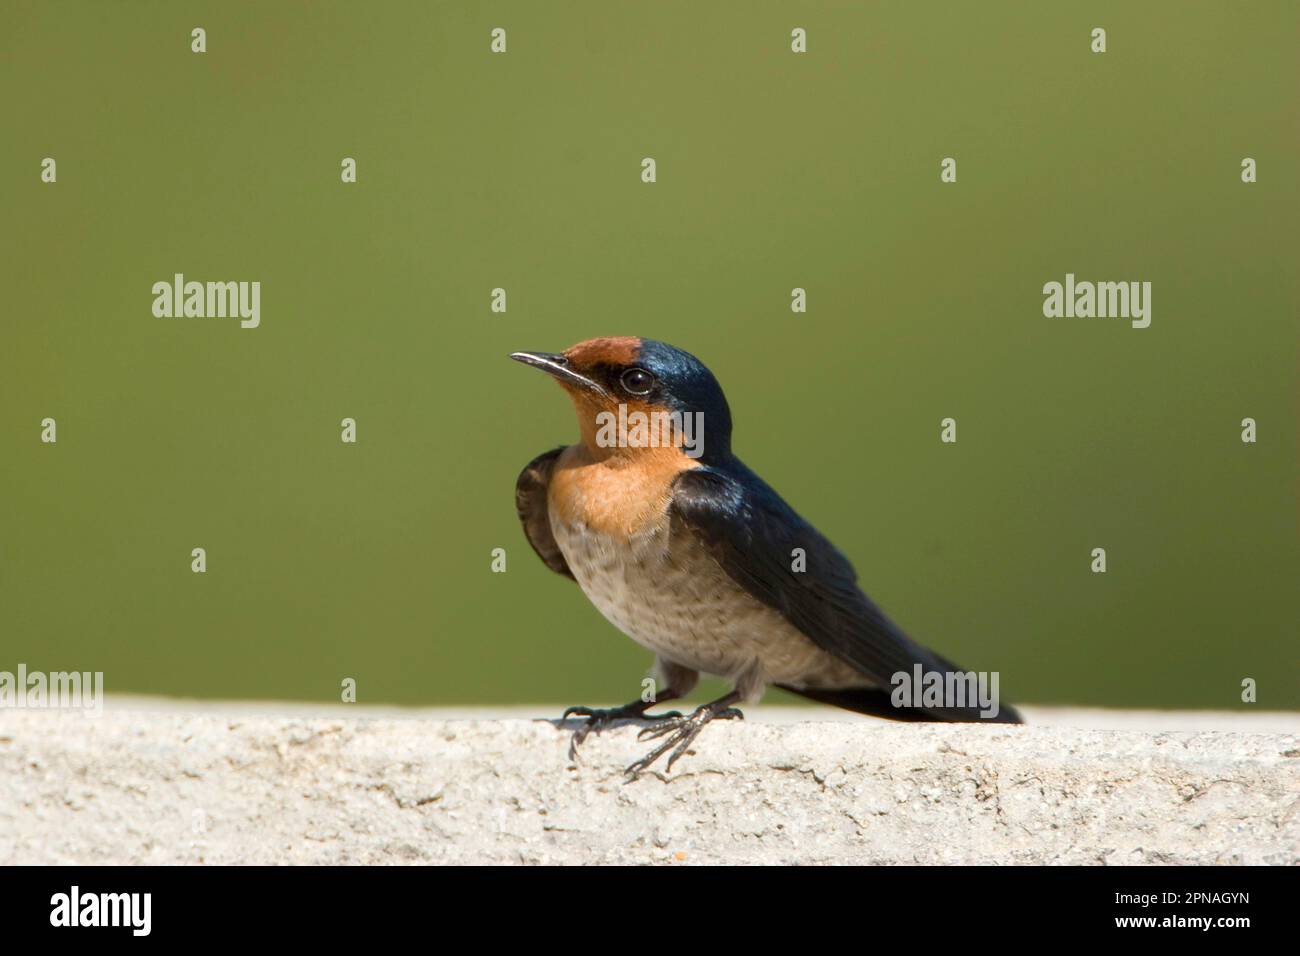 South Pacific Swallow, South Sea Swallow, Southern Terns, songbirds, animals, birds, swallows, Pacific Swallow (Hirundo tahitica) adult, perched on Stock Photo